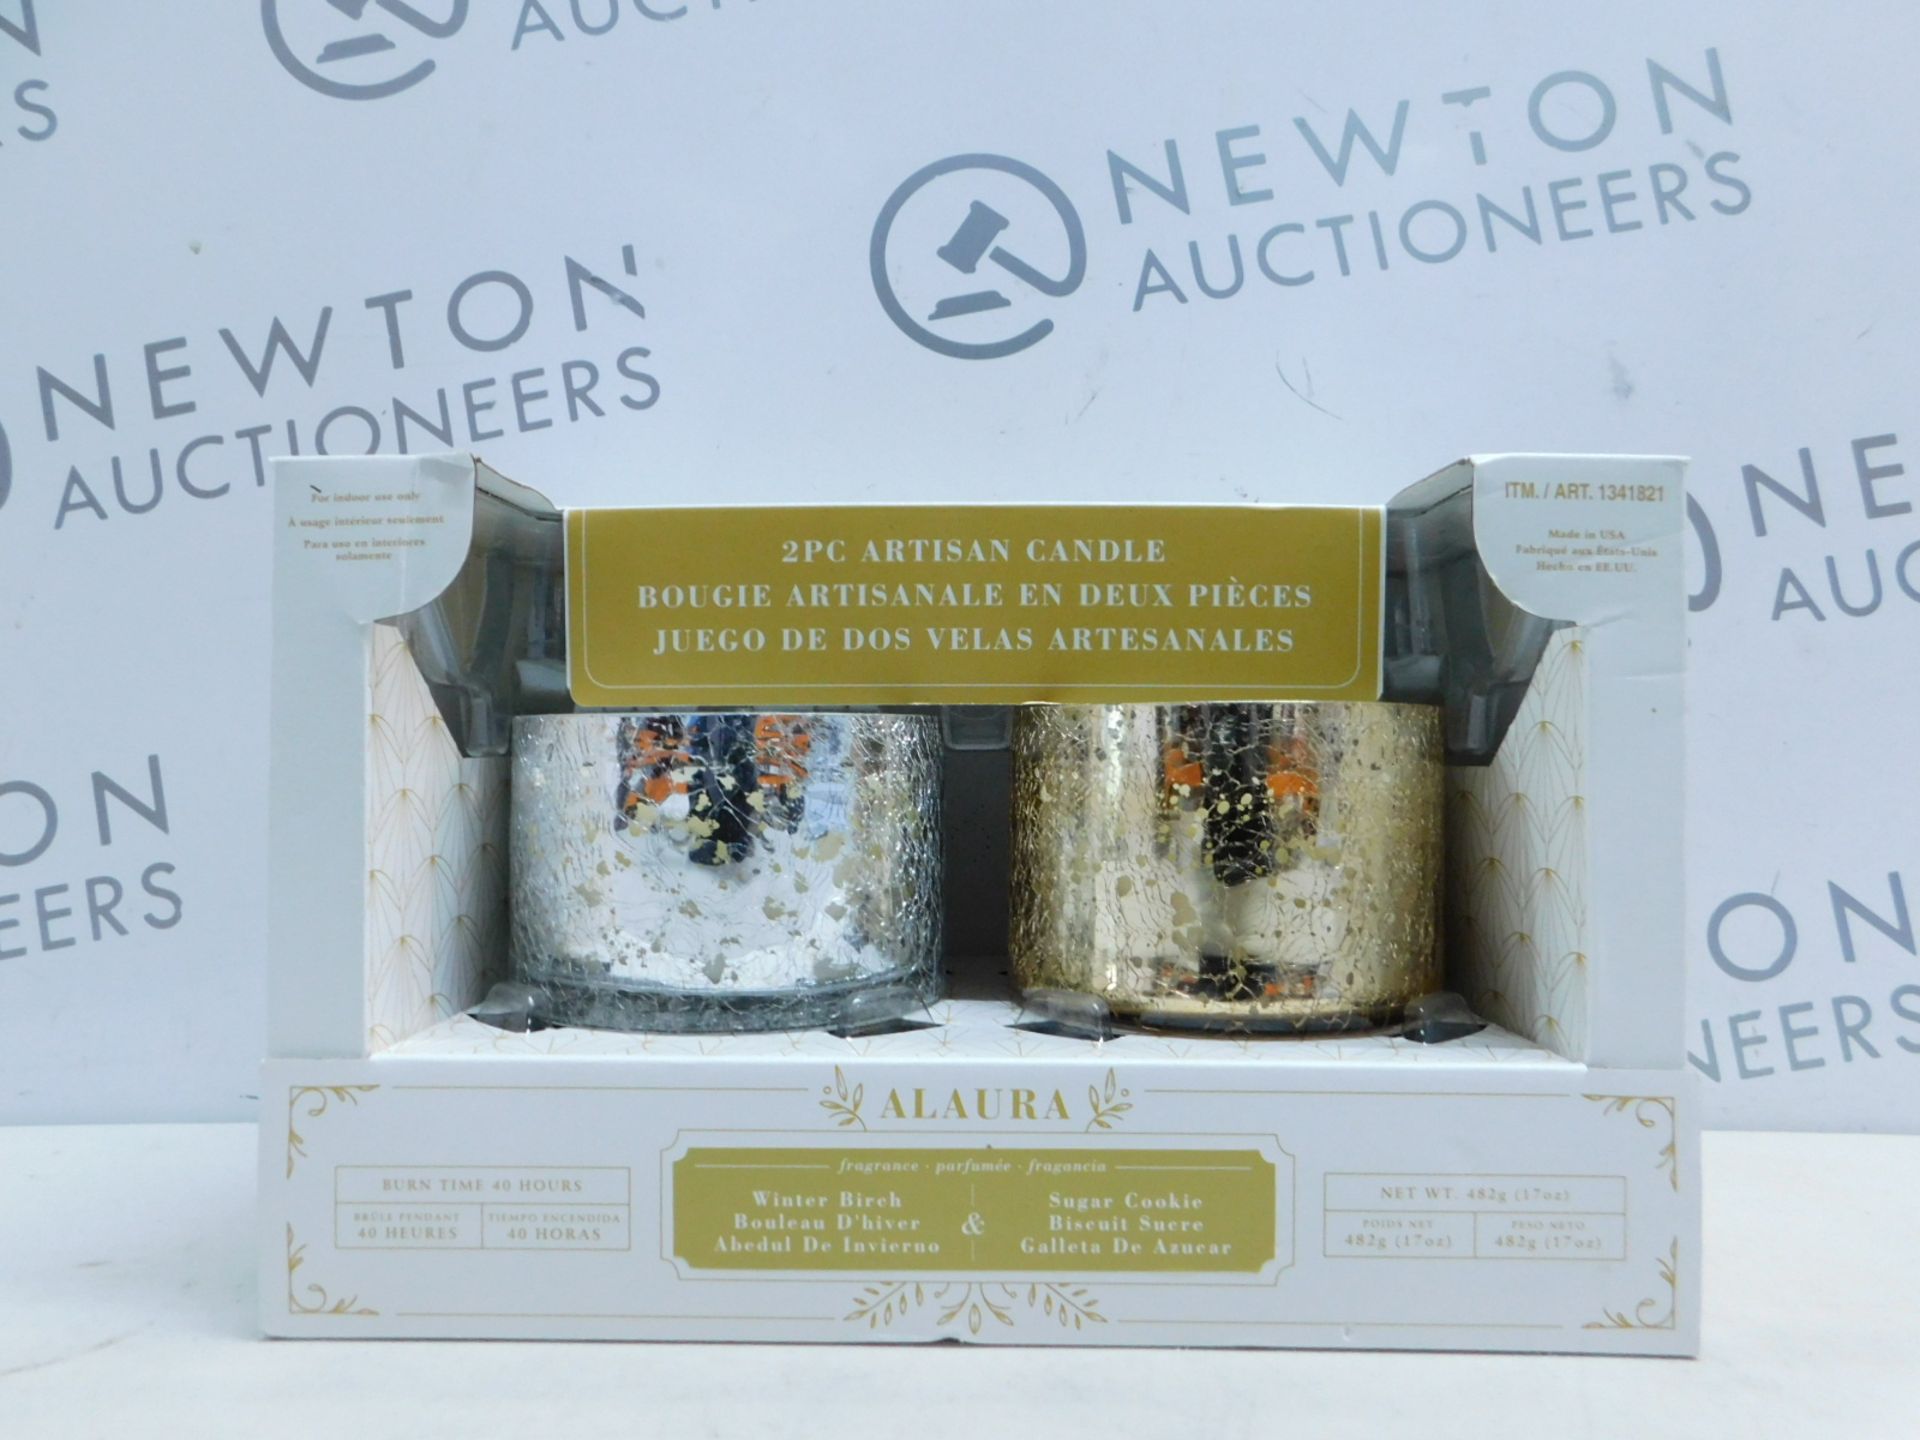 1 BOXED ALAURA 2PC ARTISAN CANDLES IN WINTER BIRCH & SUGAR COOKIE RRP Â£39.99